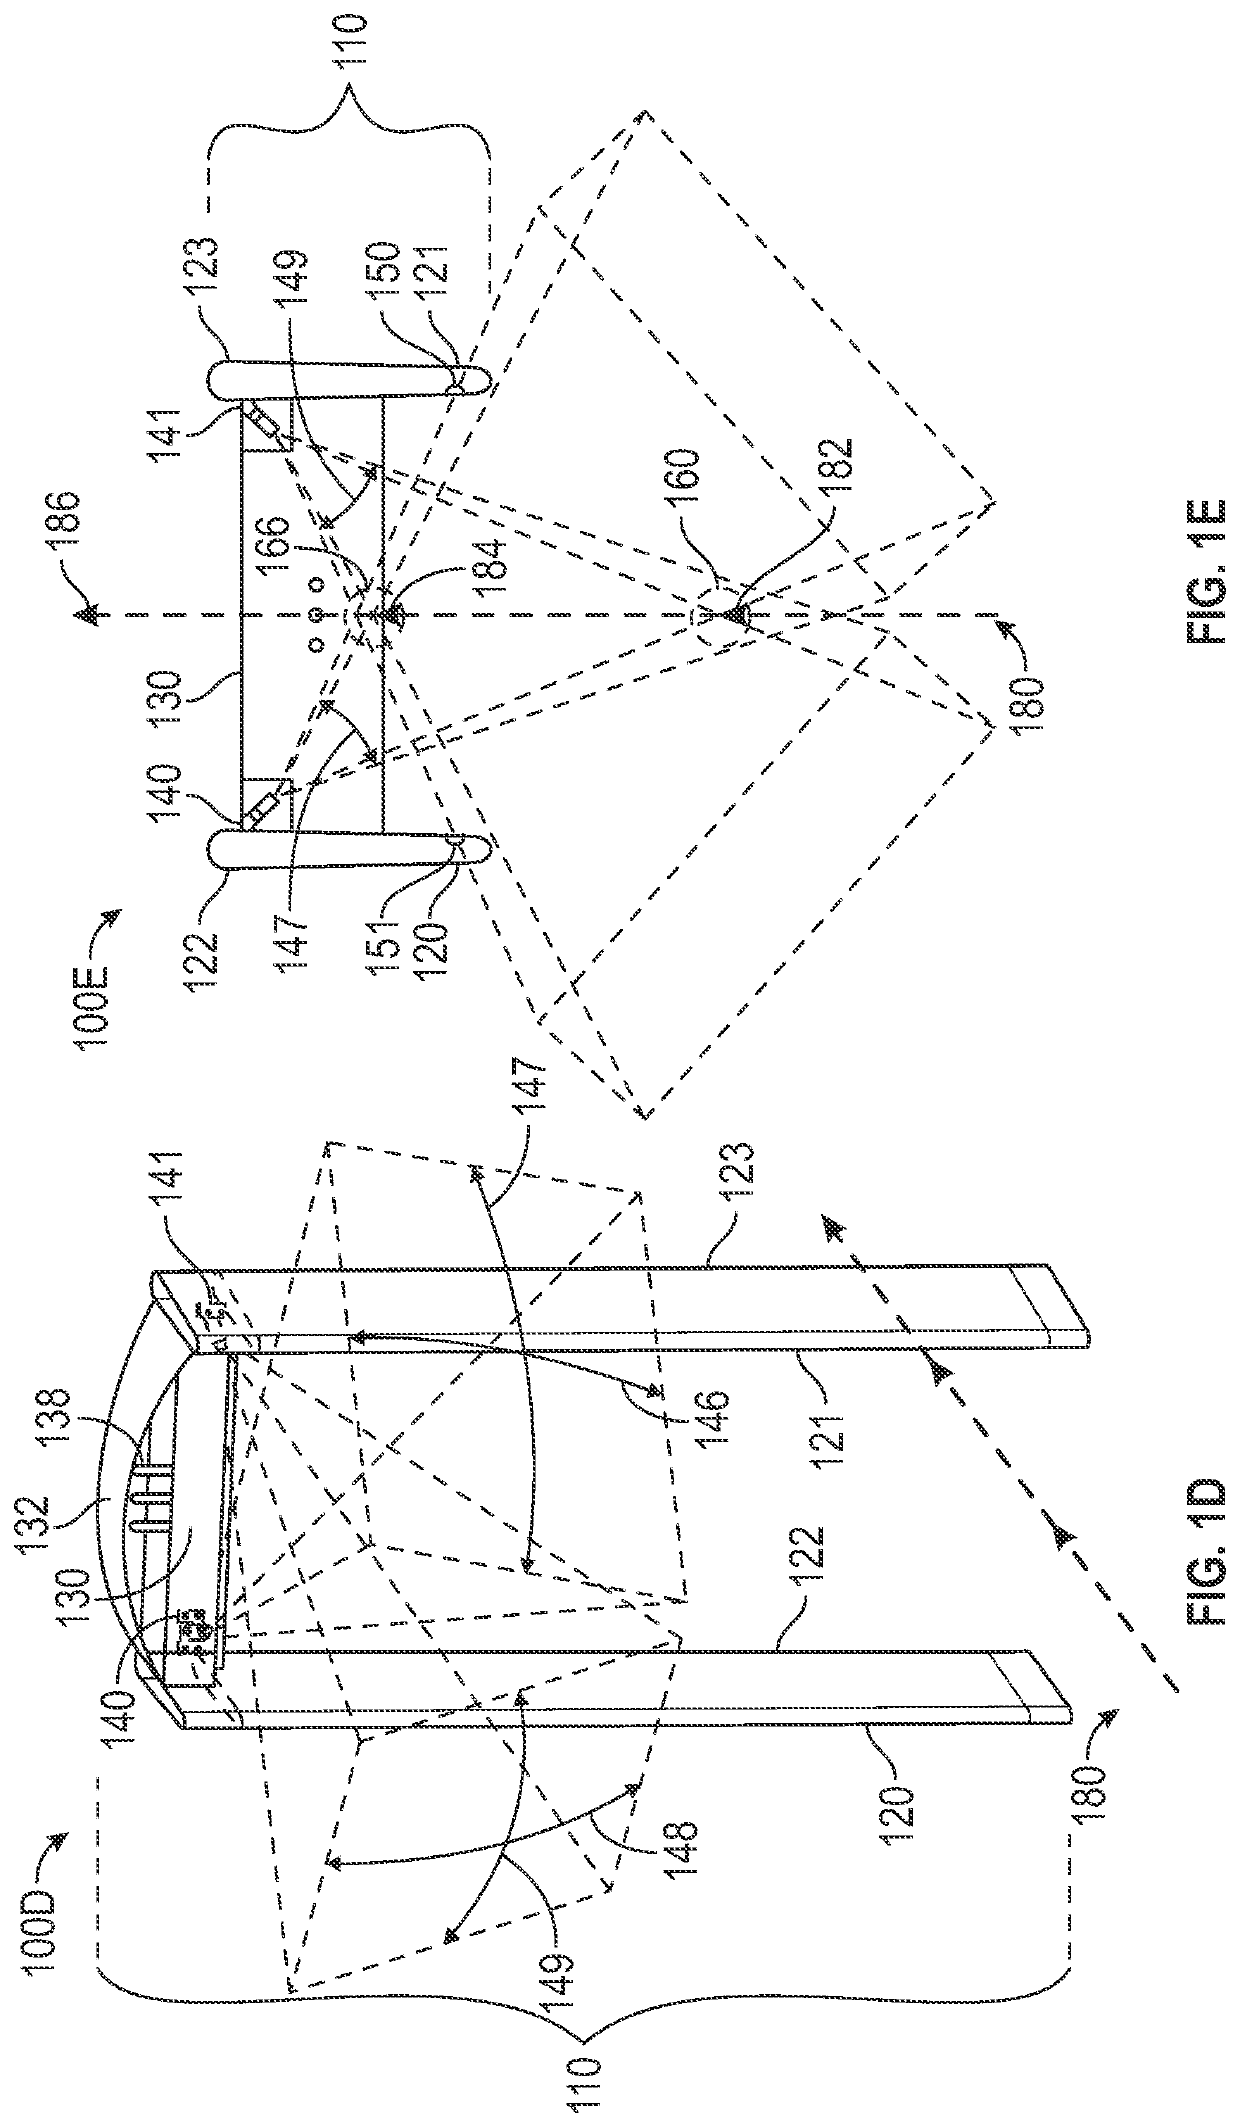 Rapid thermal dynamic image capture devices with increased recognition and monitoring capacity